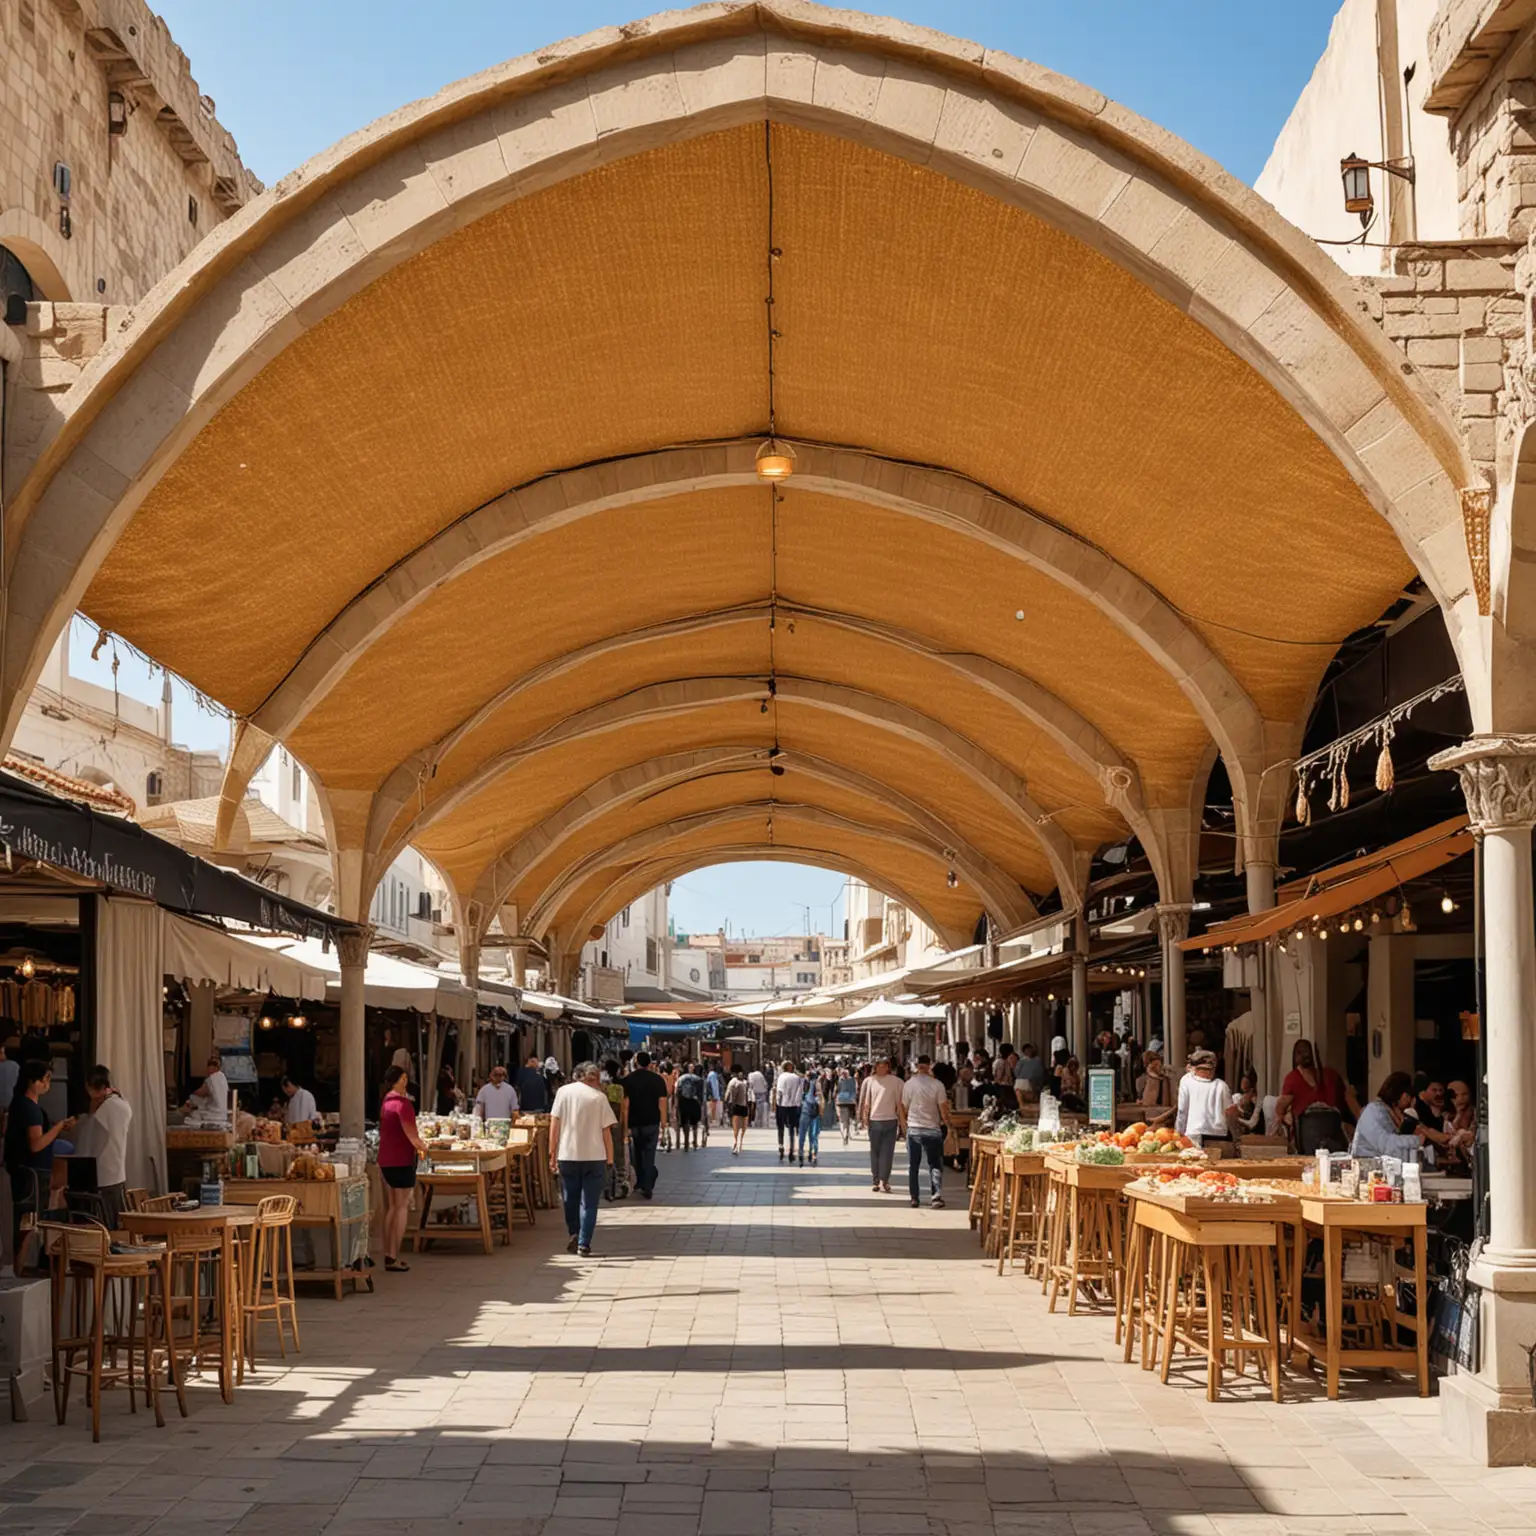 byzantine style shade structure covering and open public marketplace with people shopping.
